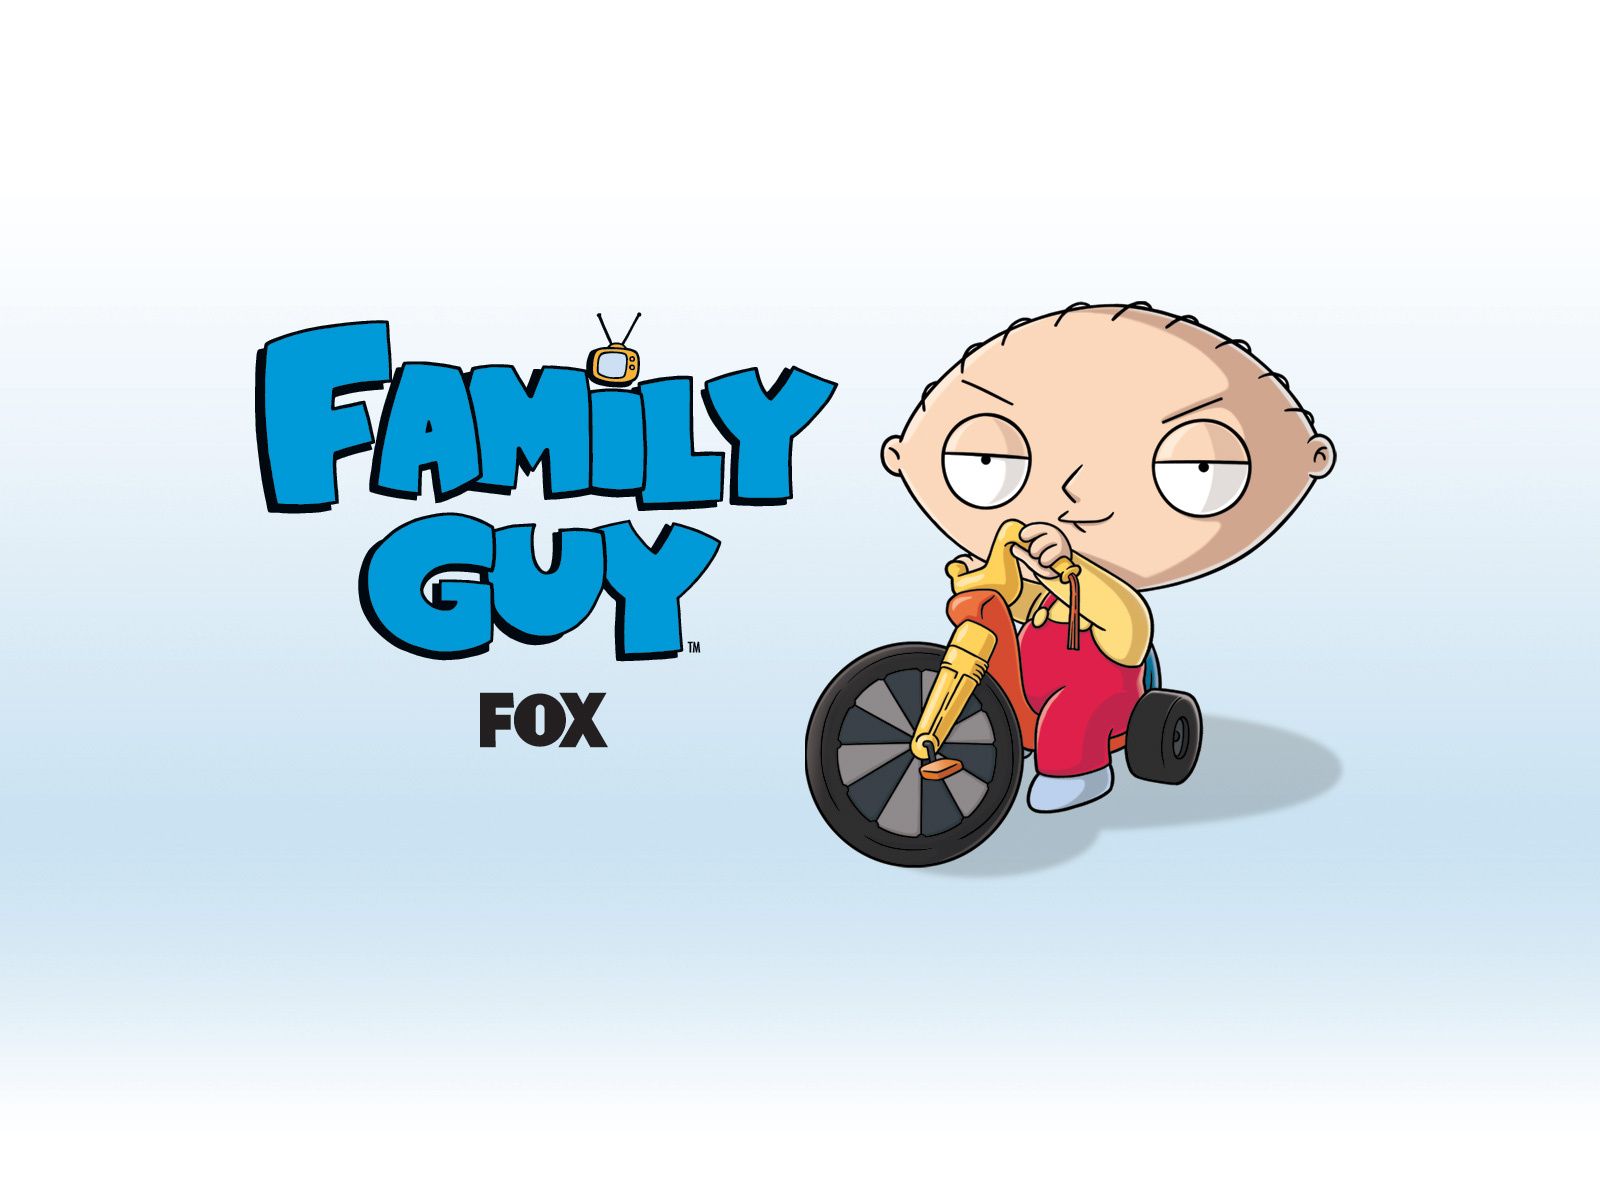 Download Family Guy Wallpaper HD 2030 1920x1080 px High Resolution